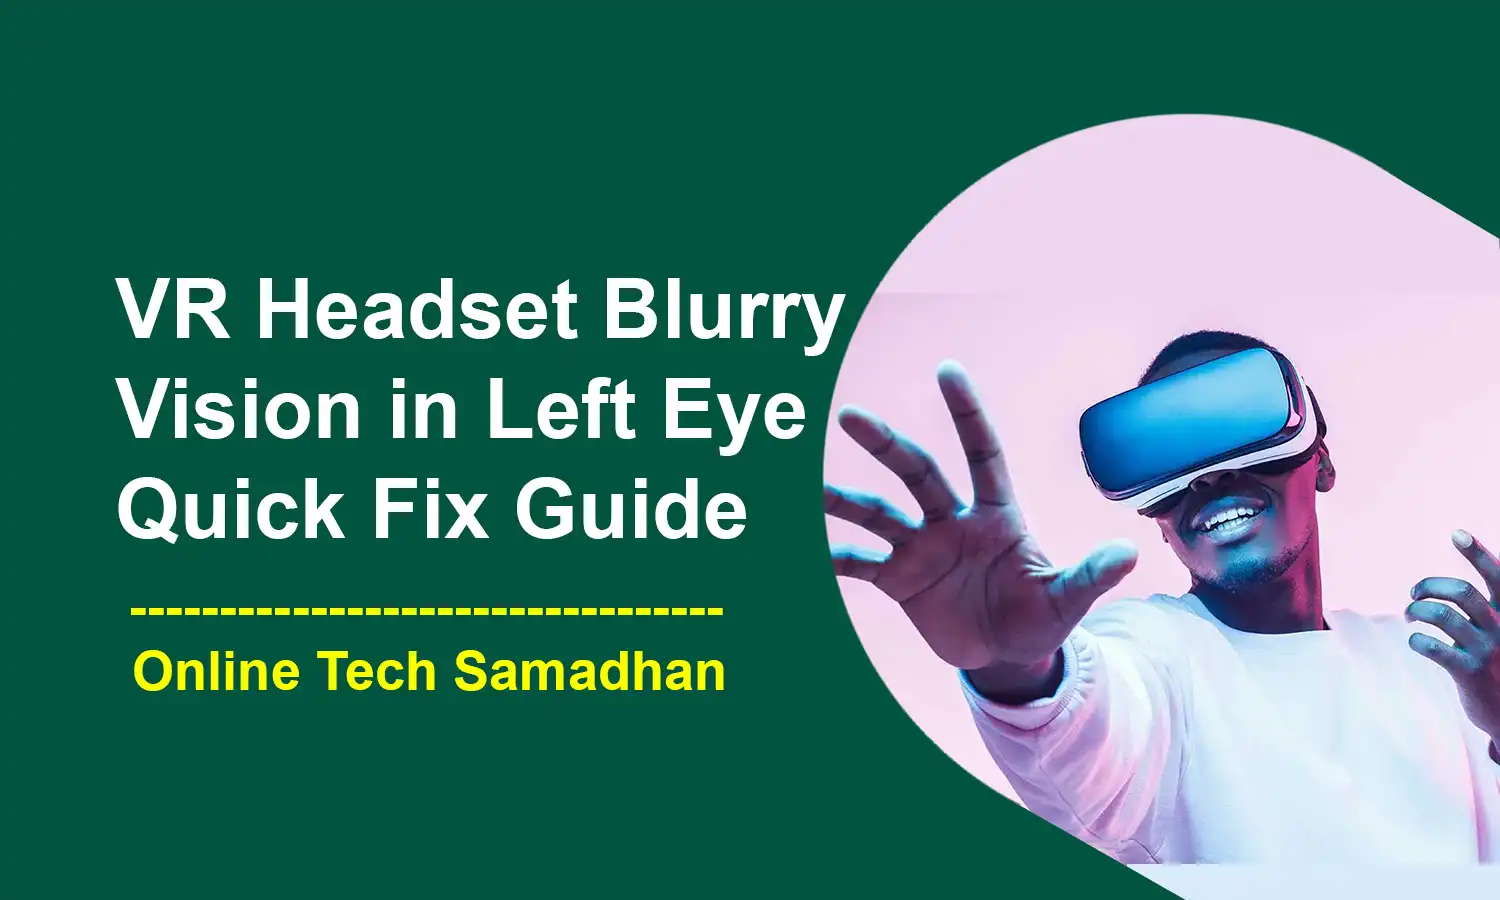 VR Headset Troubleshooting for Blurry Vision in Left Eye Only a Quick Fix